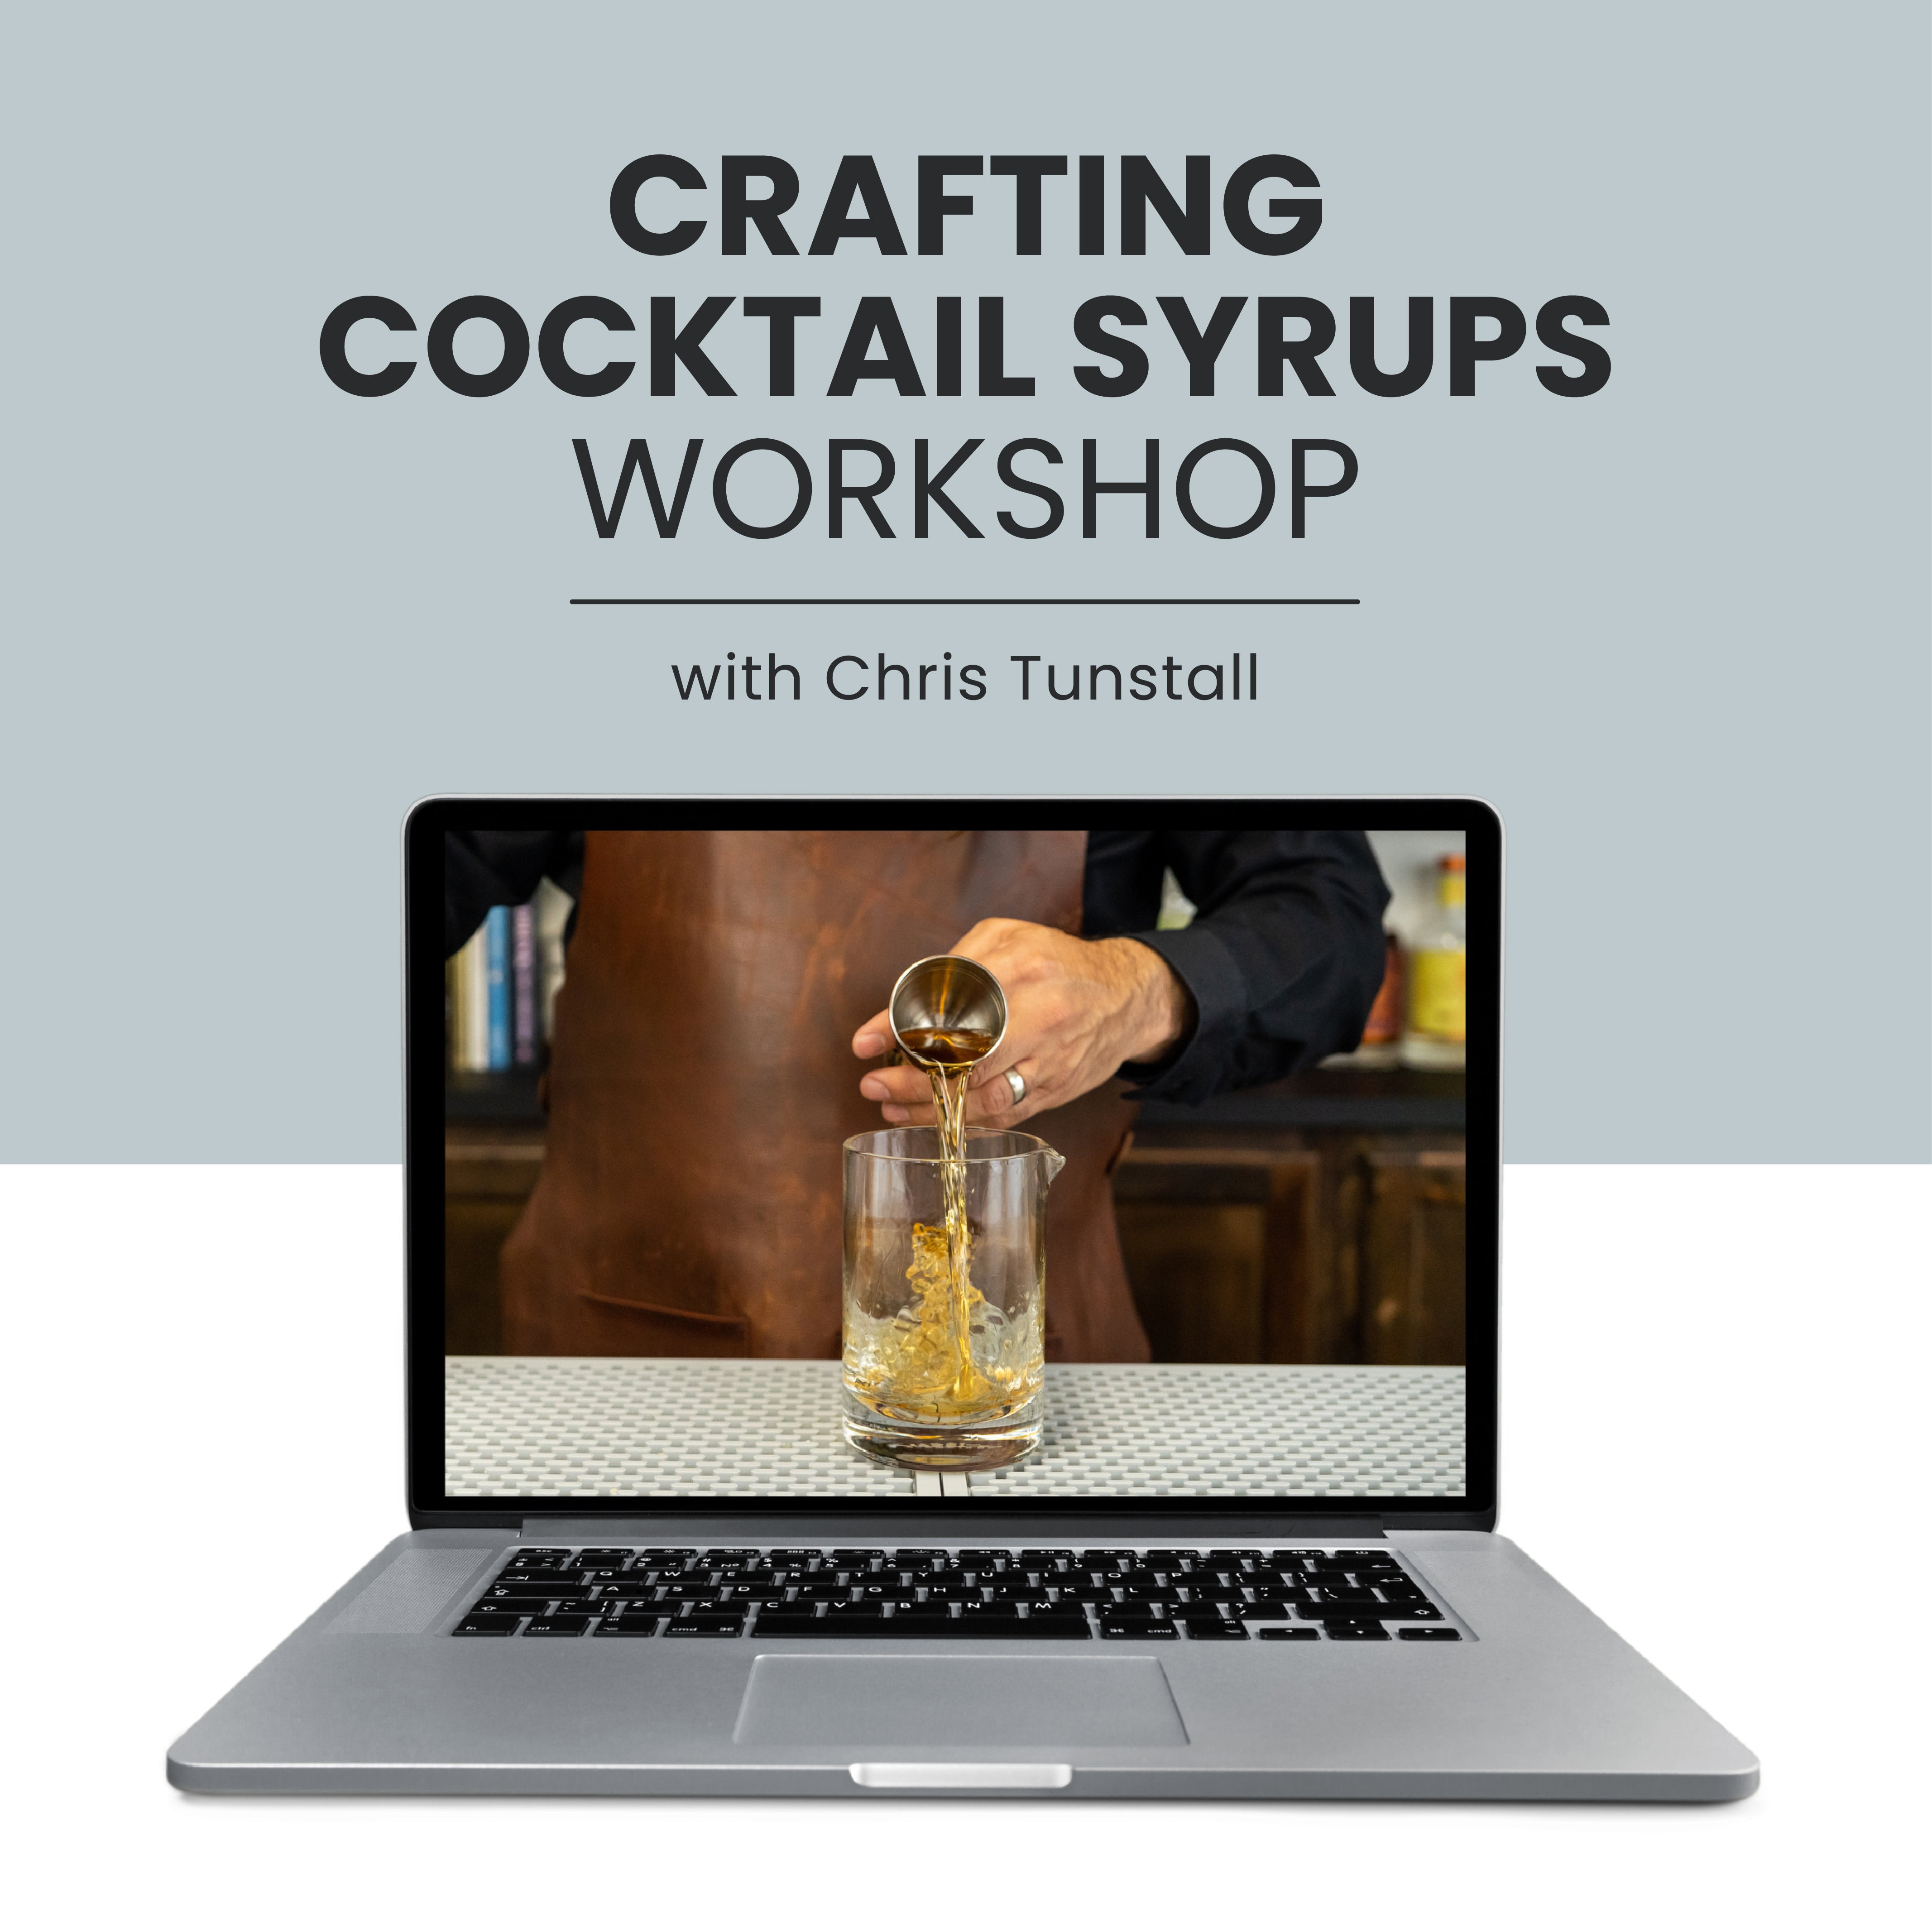 The Crafting Cocktail Syrups Workshop